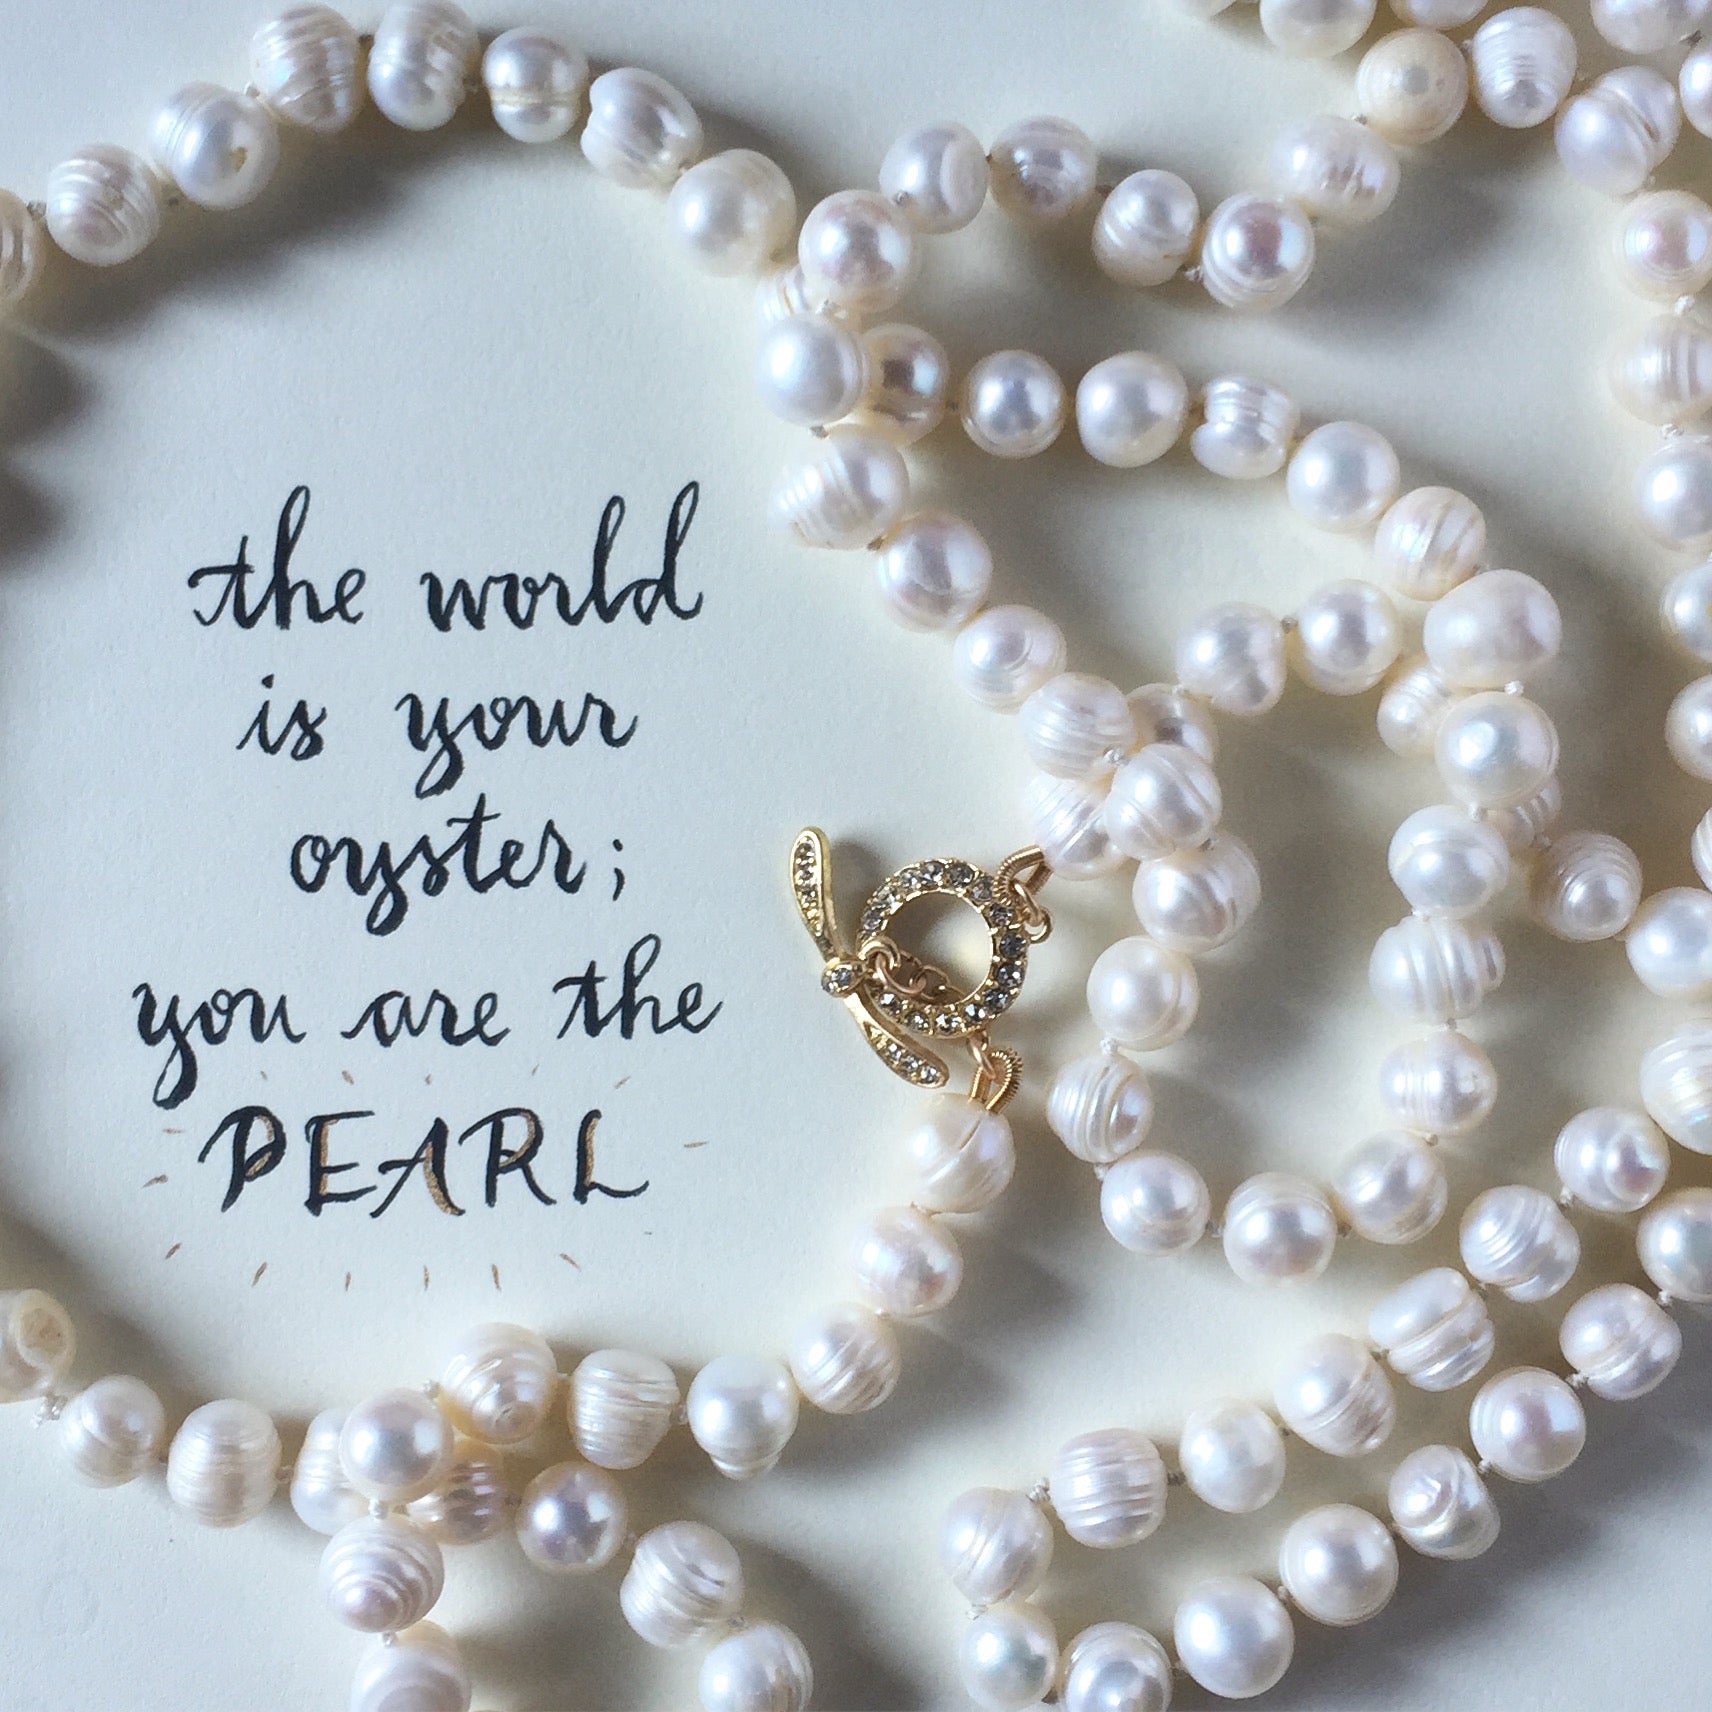 #SequinSayings - You are the Pearl